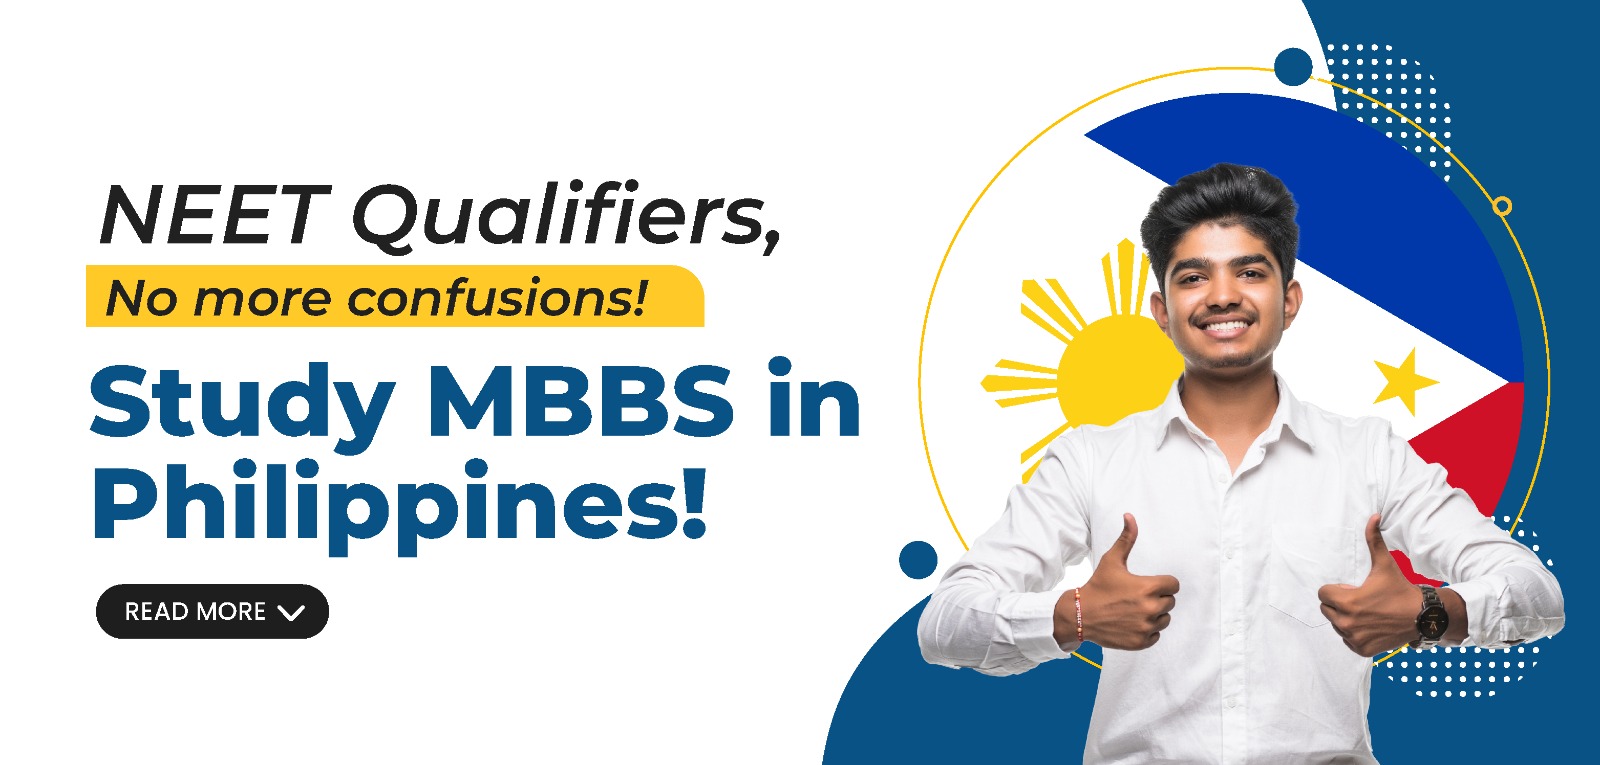 NEET Qualifiers, No more confusions! Study MBBS in Philippines!